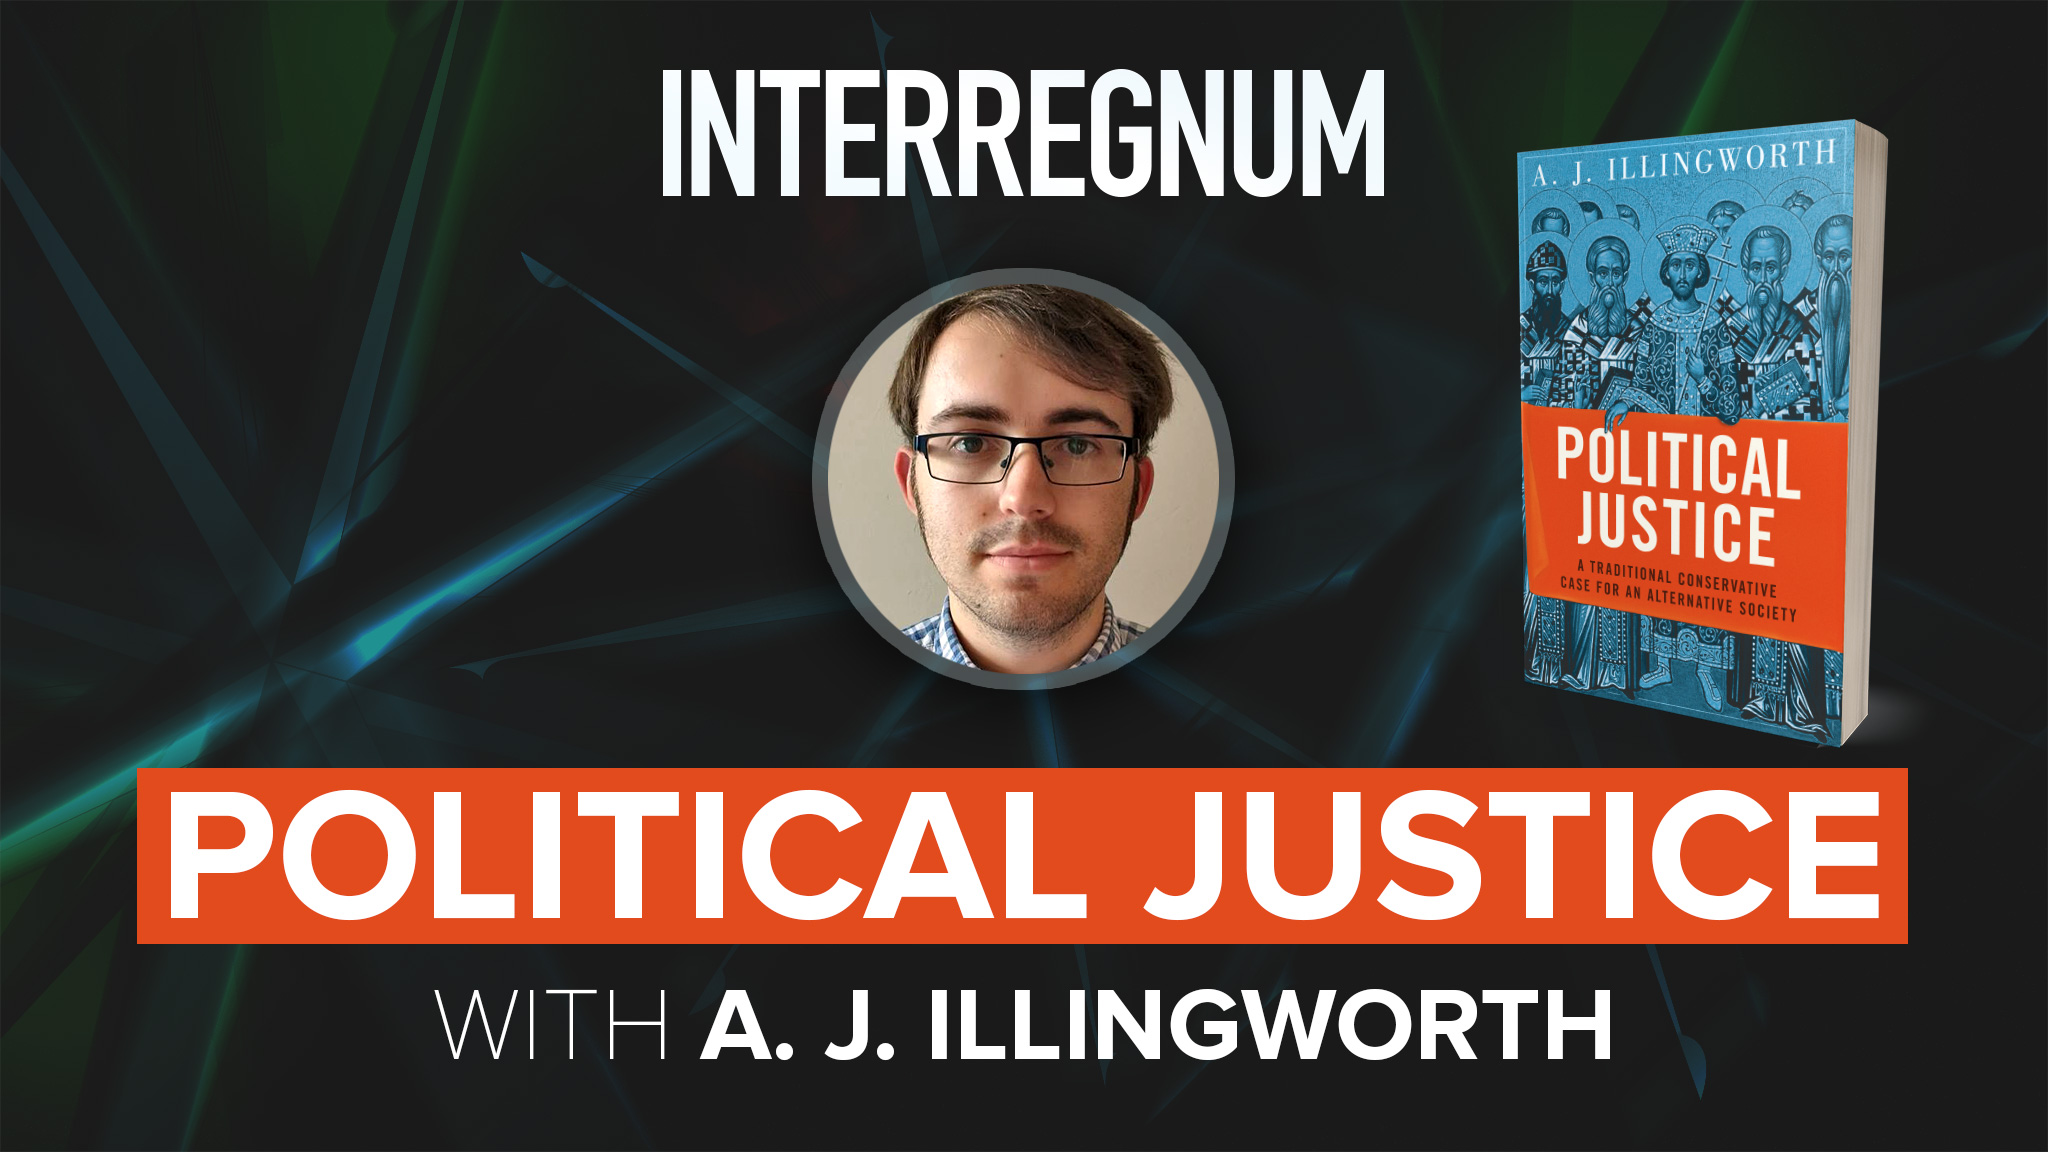 Political Justice with A. J. Illingworth